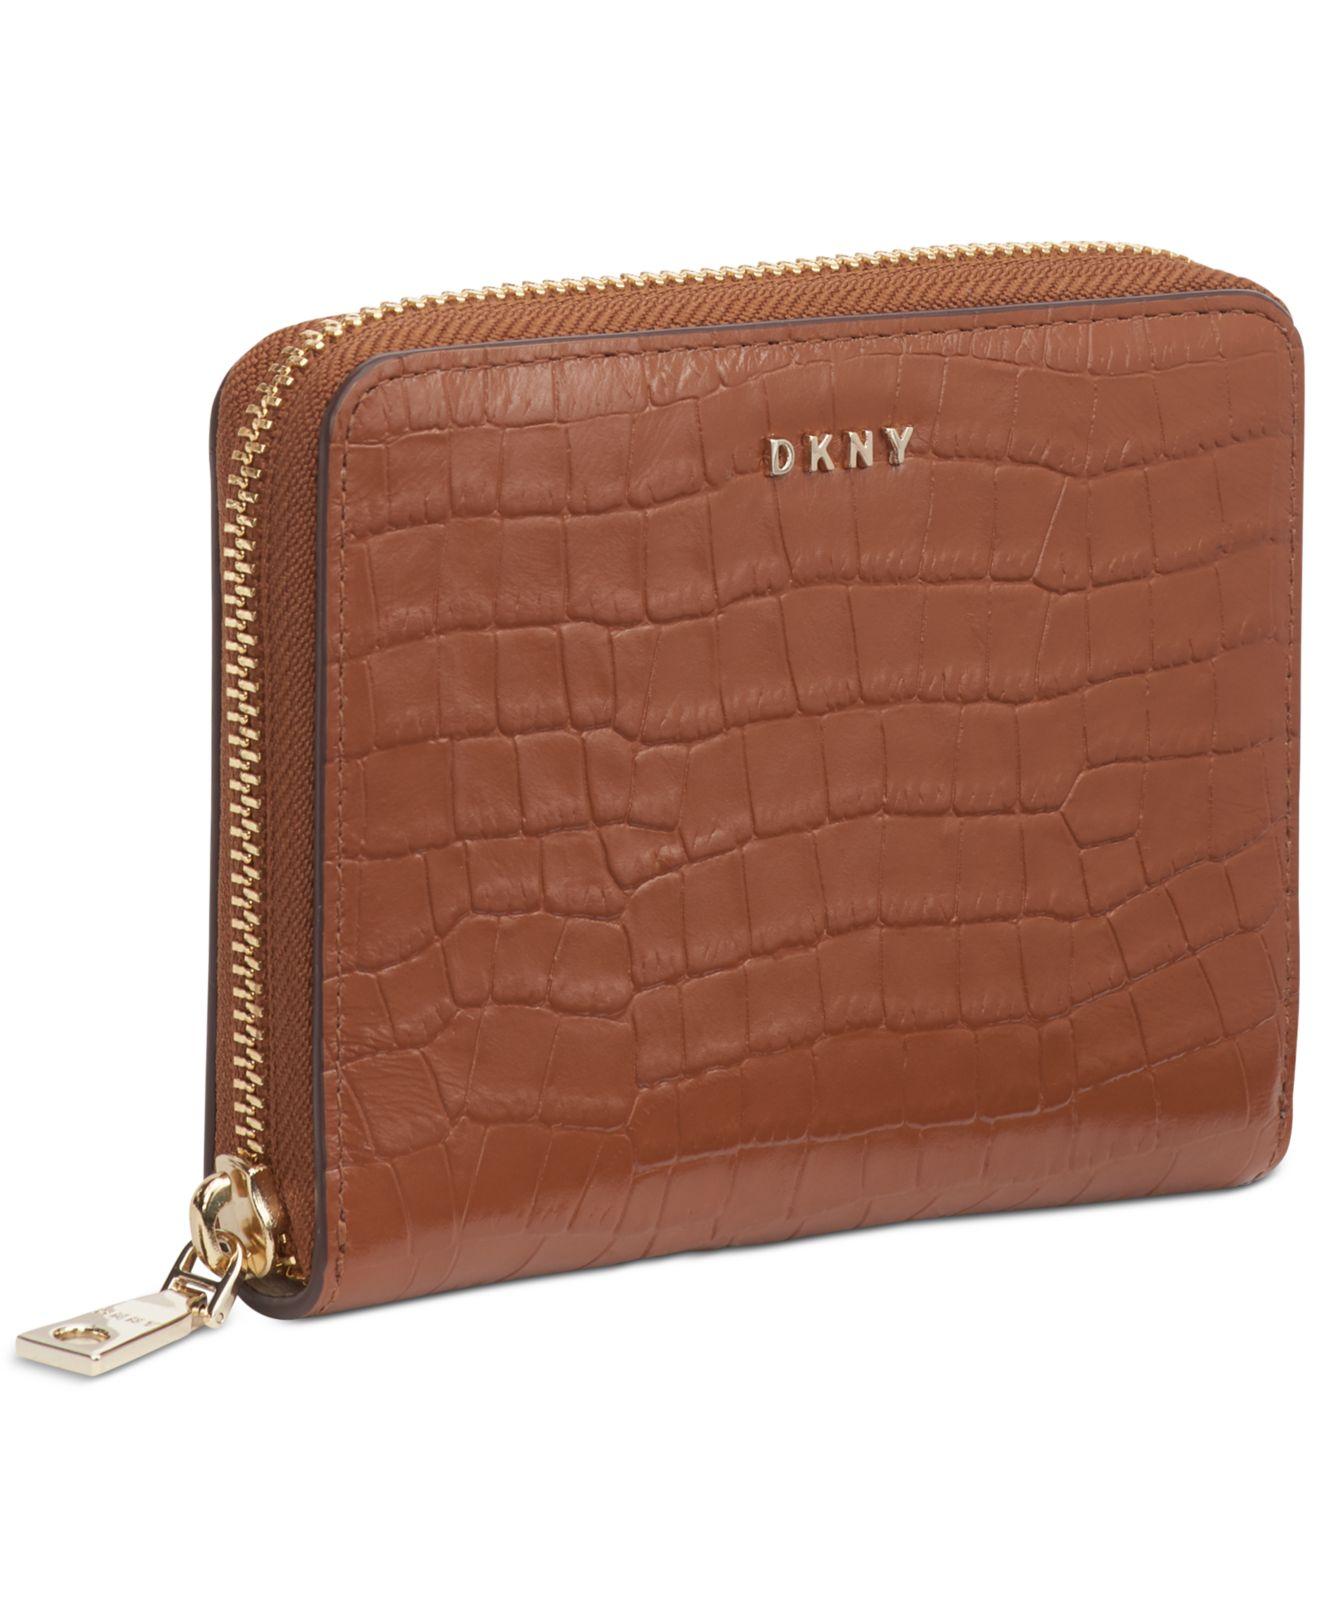 DKNY Bryant Croc Zip Around Leather Wallet, Created For Macy's in  Caramel/Gold (Brown) - Lyst